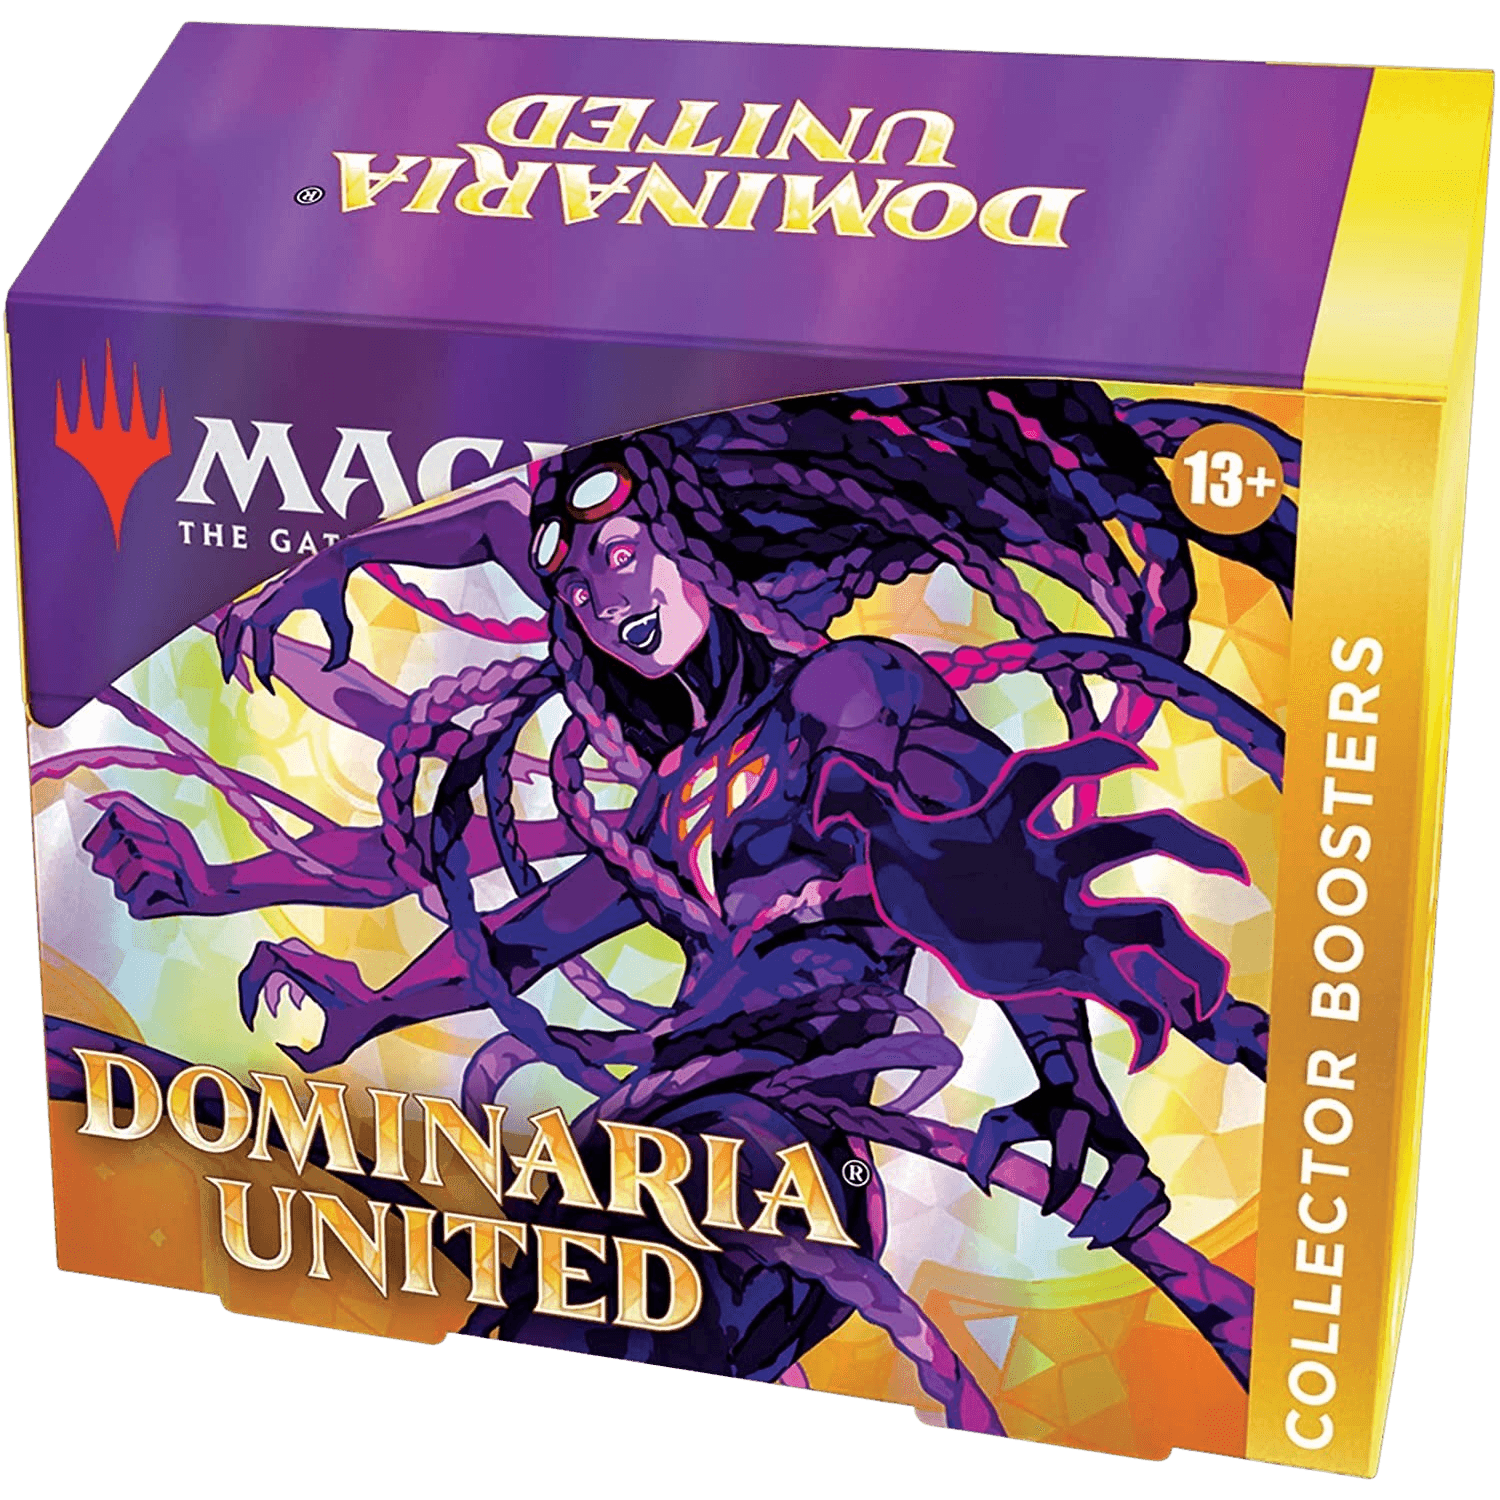 Magic: The Gathering - Dominaria United Collector Booster Box (12 Packs) - The Card Vault